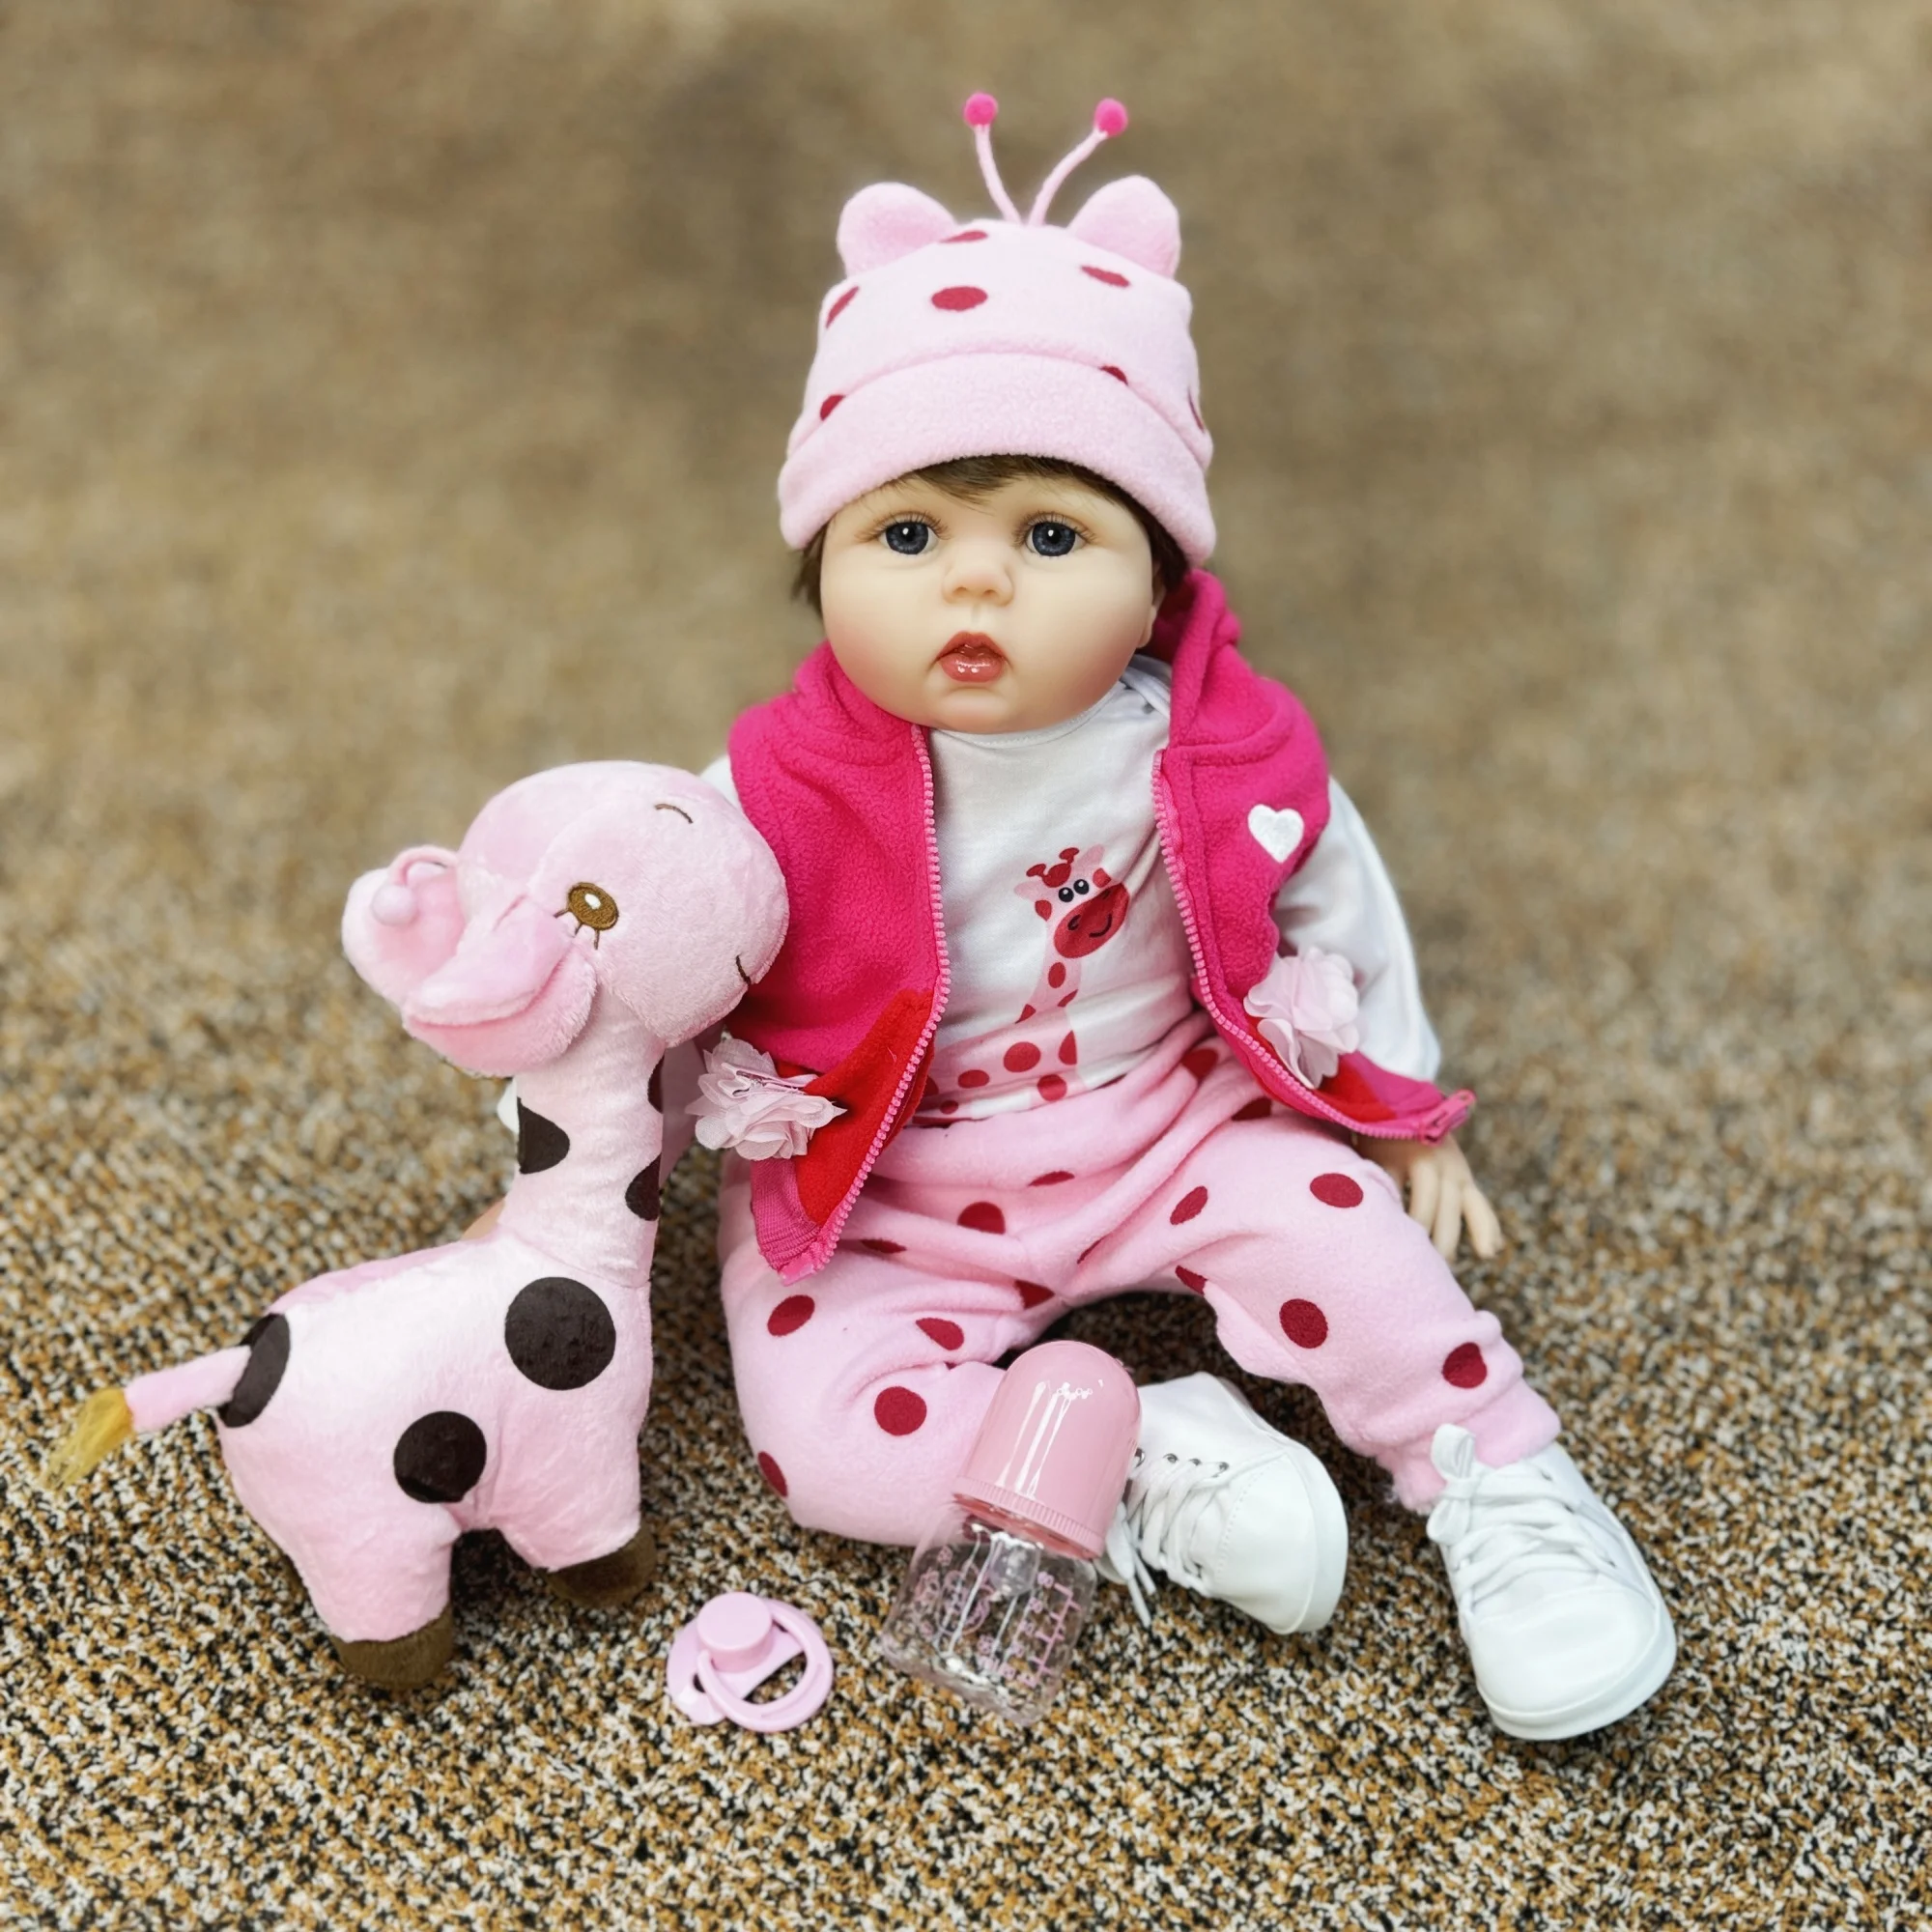 

50cm Cuddly Bebe Reborn Painted Skin Lifelike Real Art Newborn Baby Doll With 5 Pieces Outfits muñecas reborn